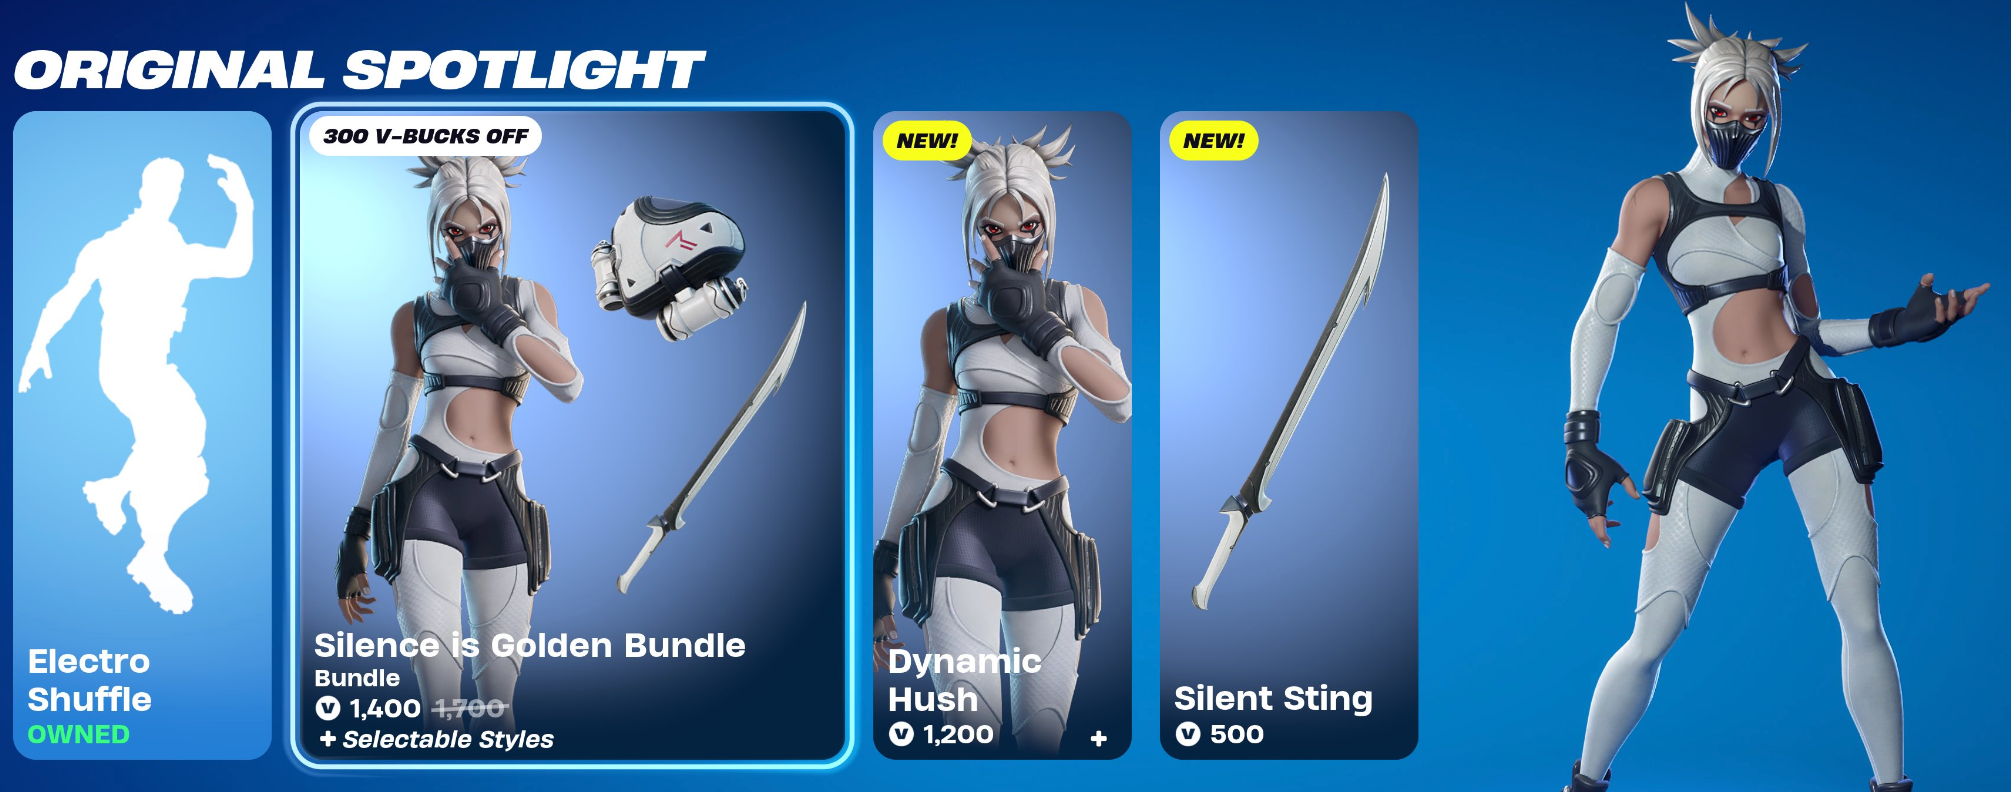 New Silence is Golden Bundle Available Now